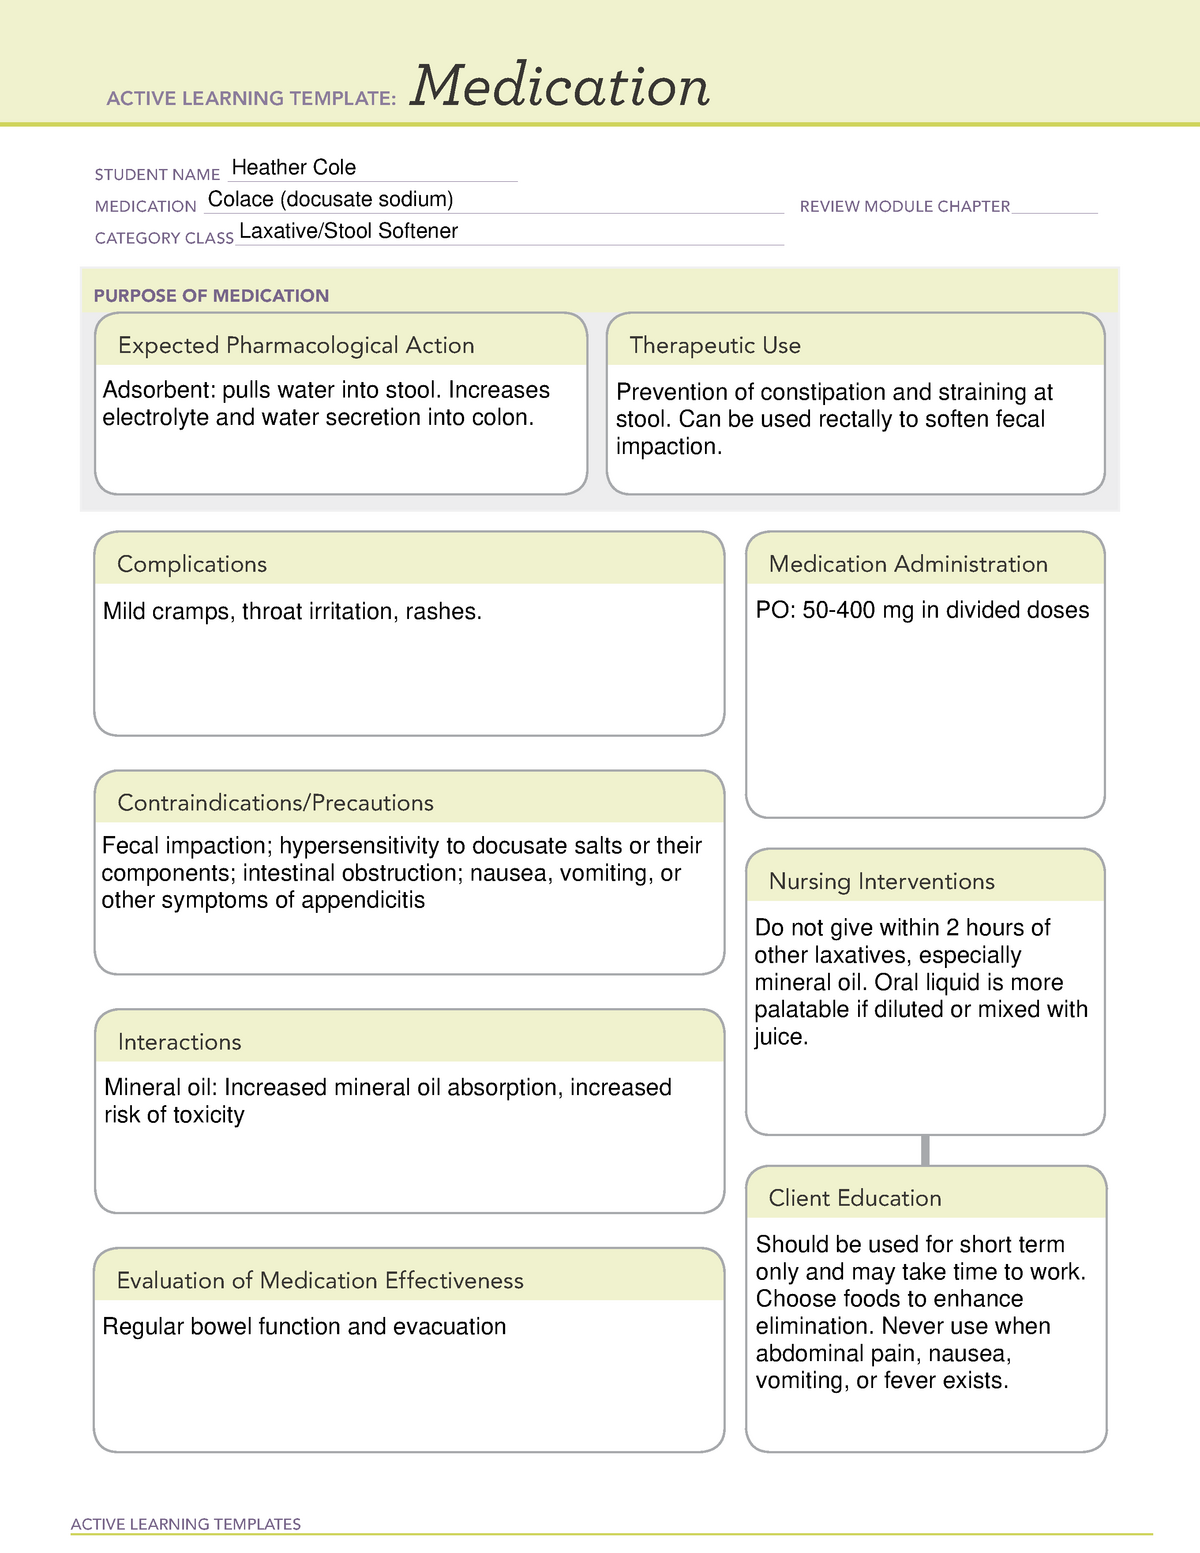 colace-drug-cards-active-learning-templates-medication-student-name-studocu